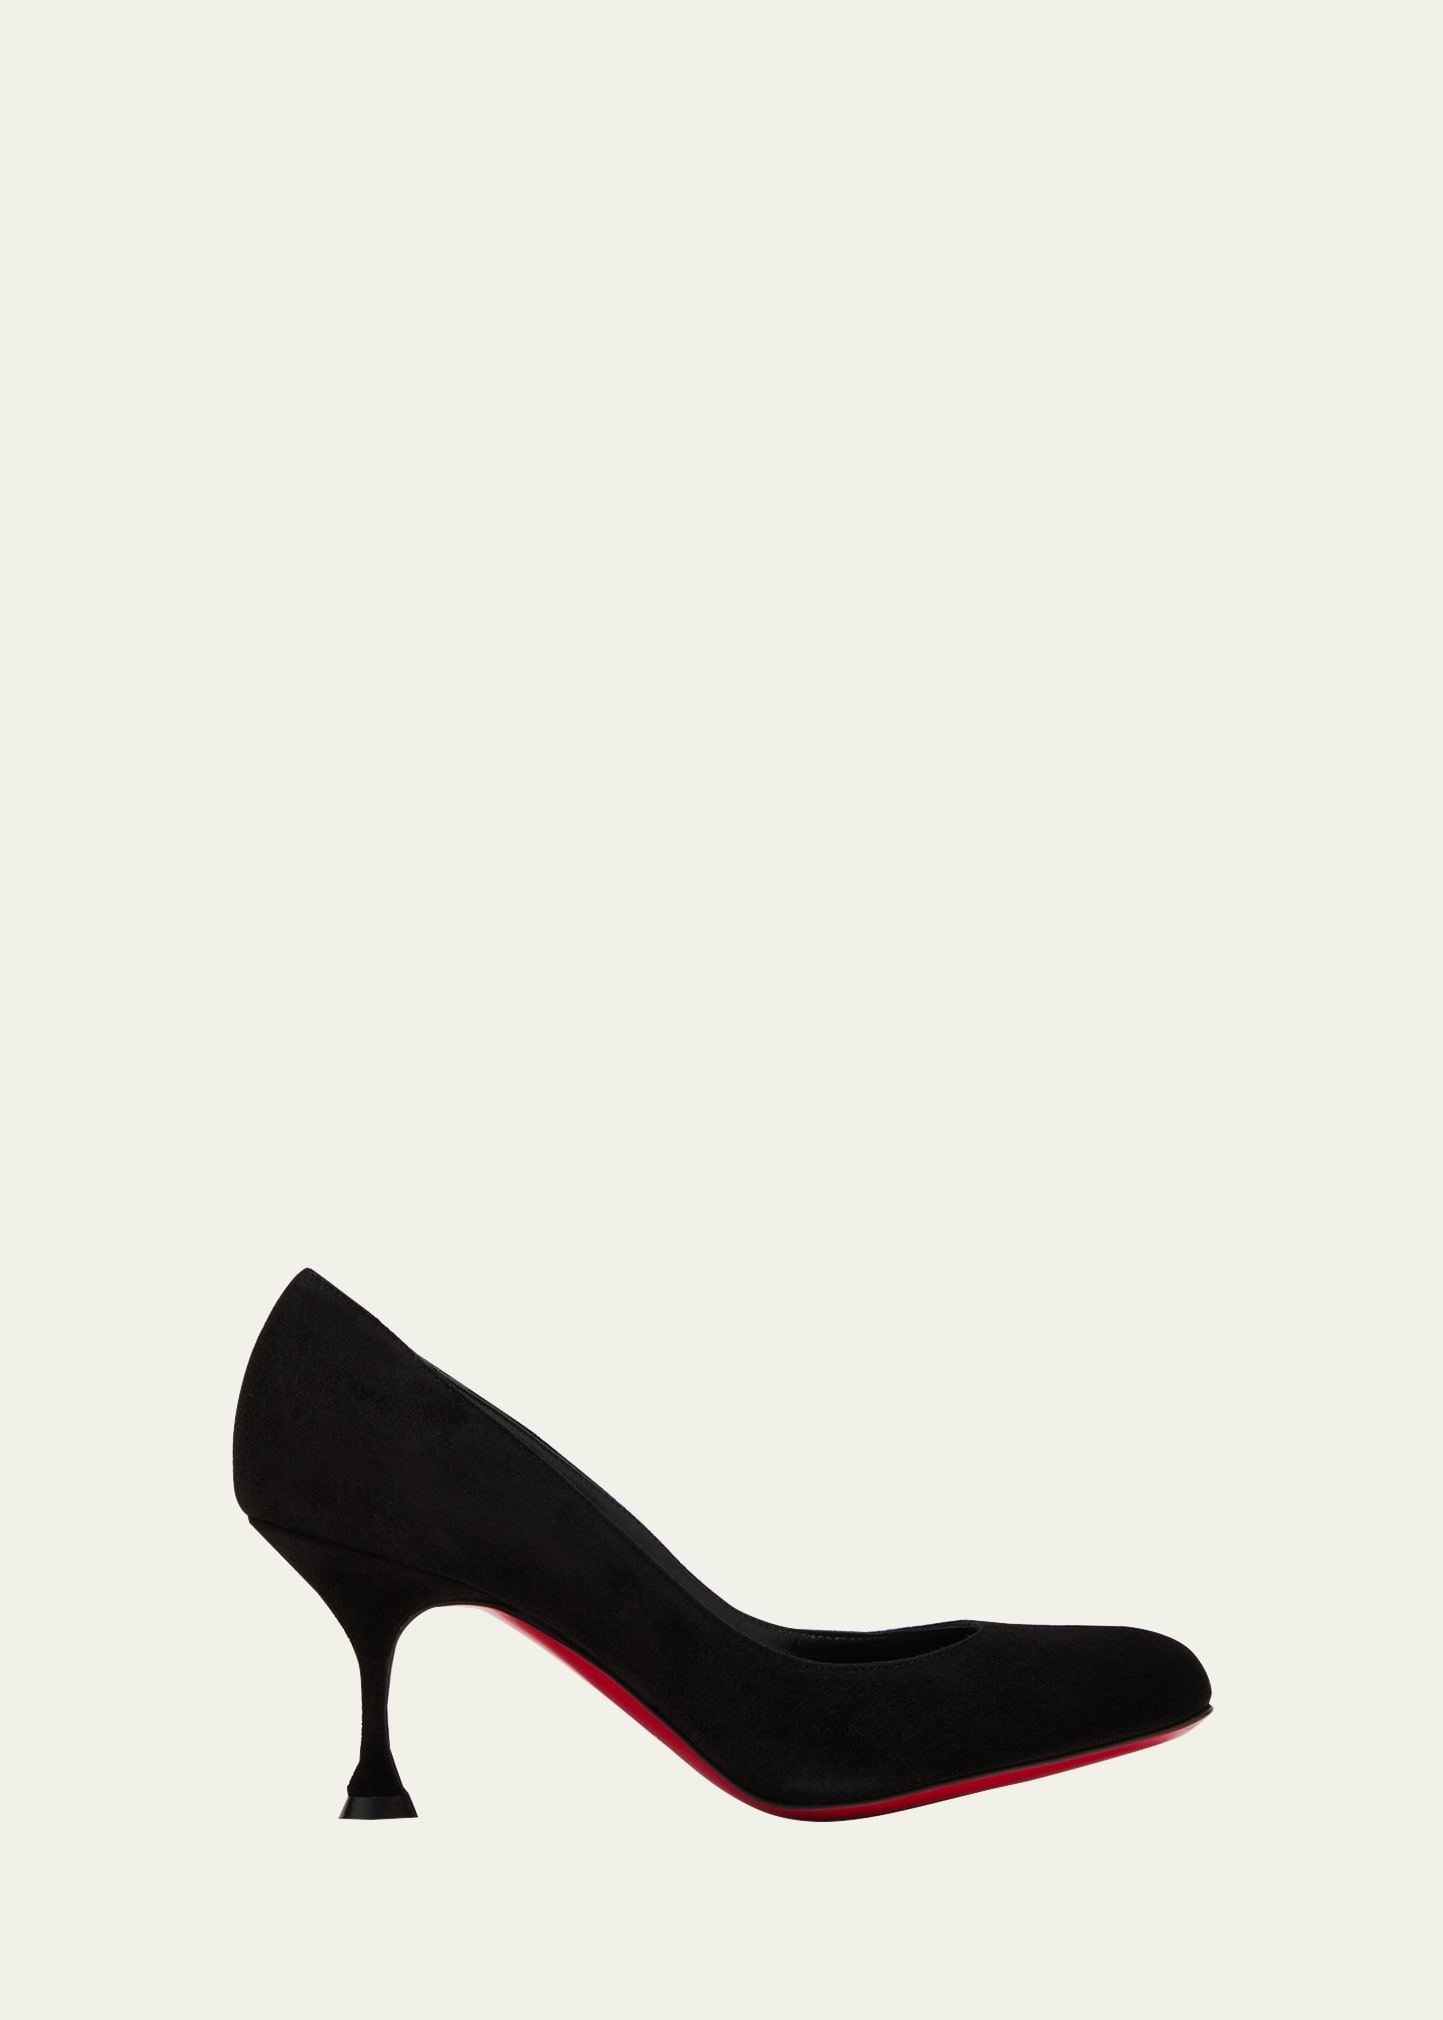 CHRISTIAN LOUBOUTIN STELLA SUEDE RED SOLE PUMPS